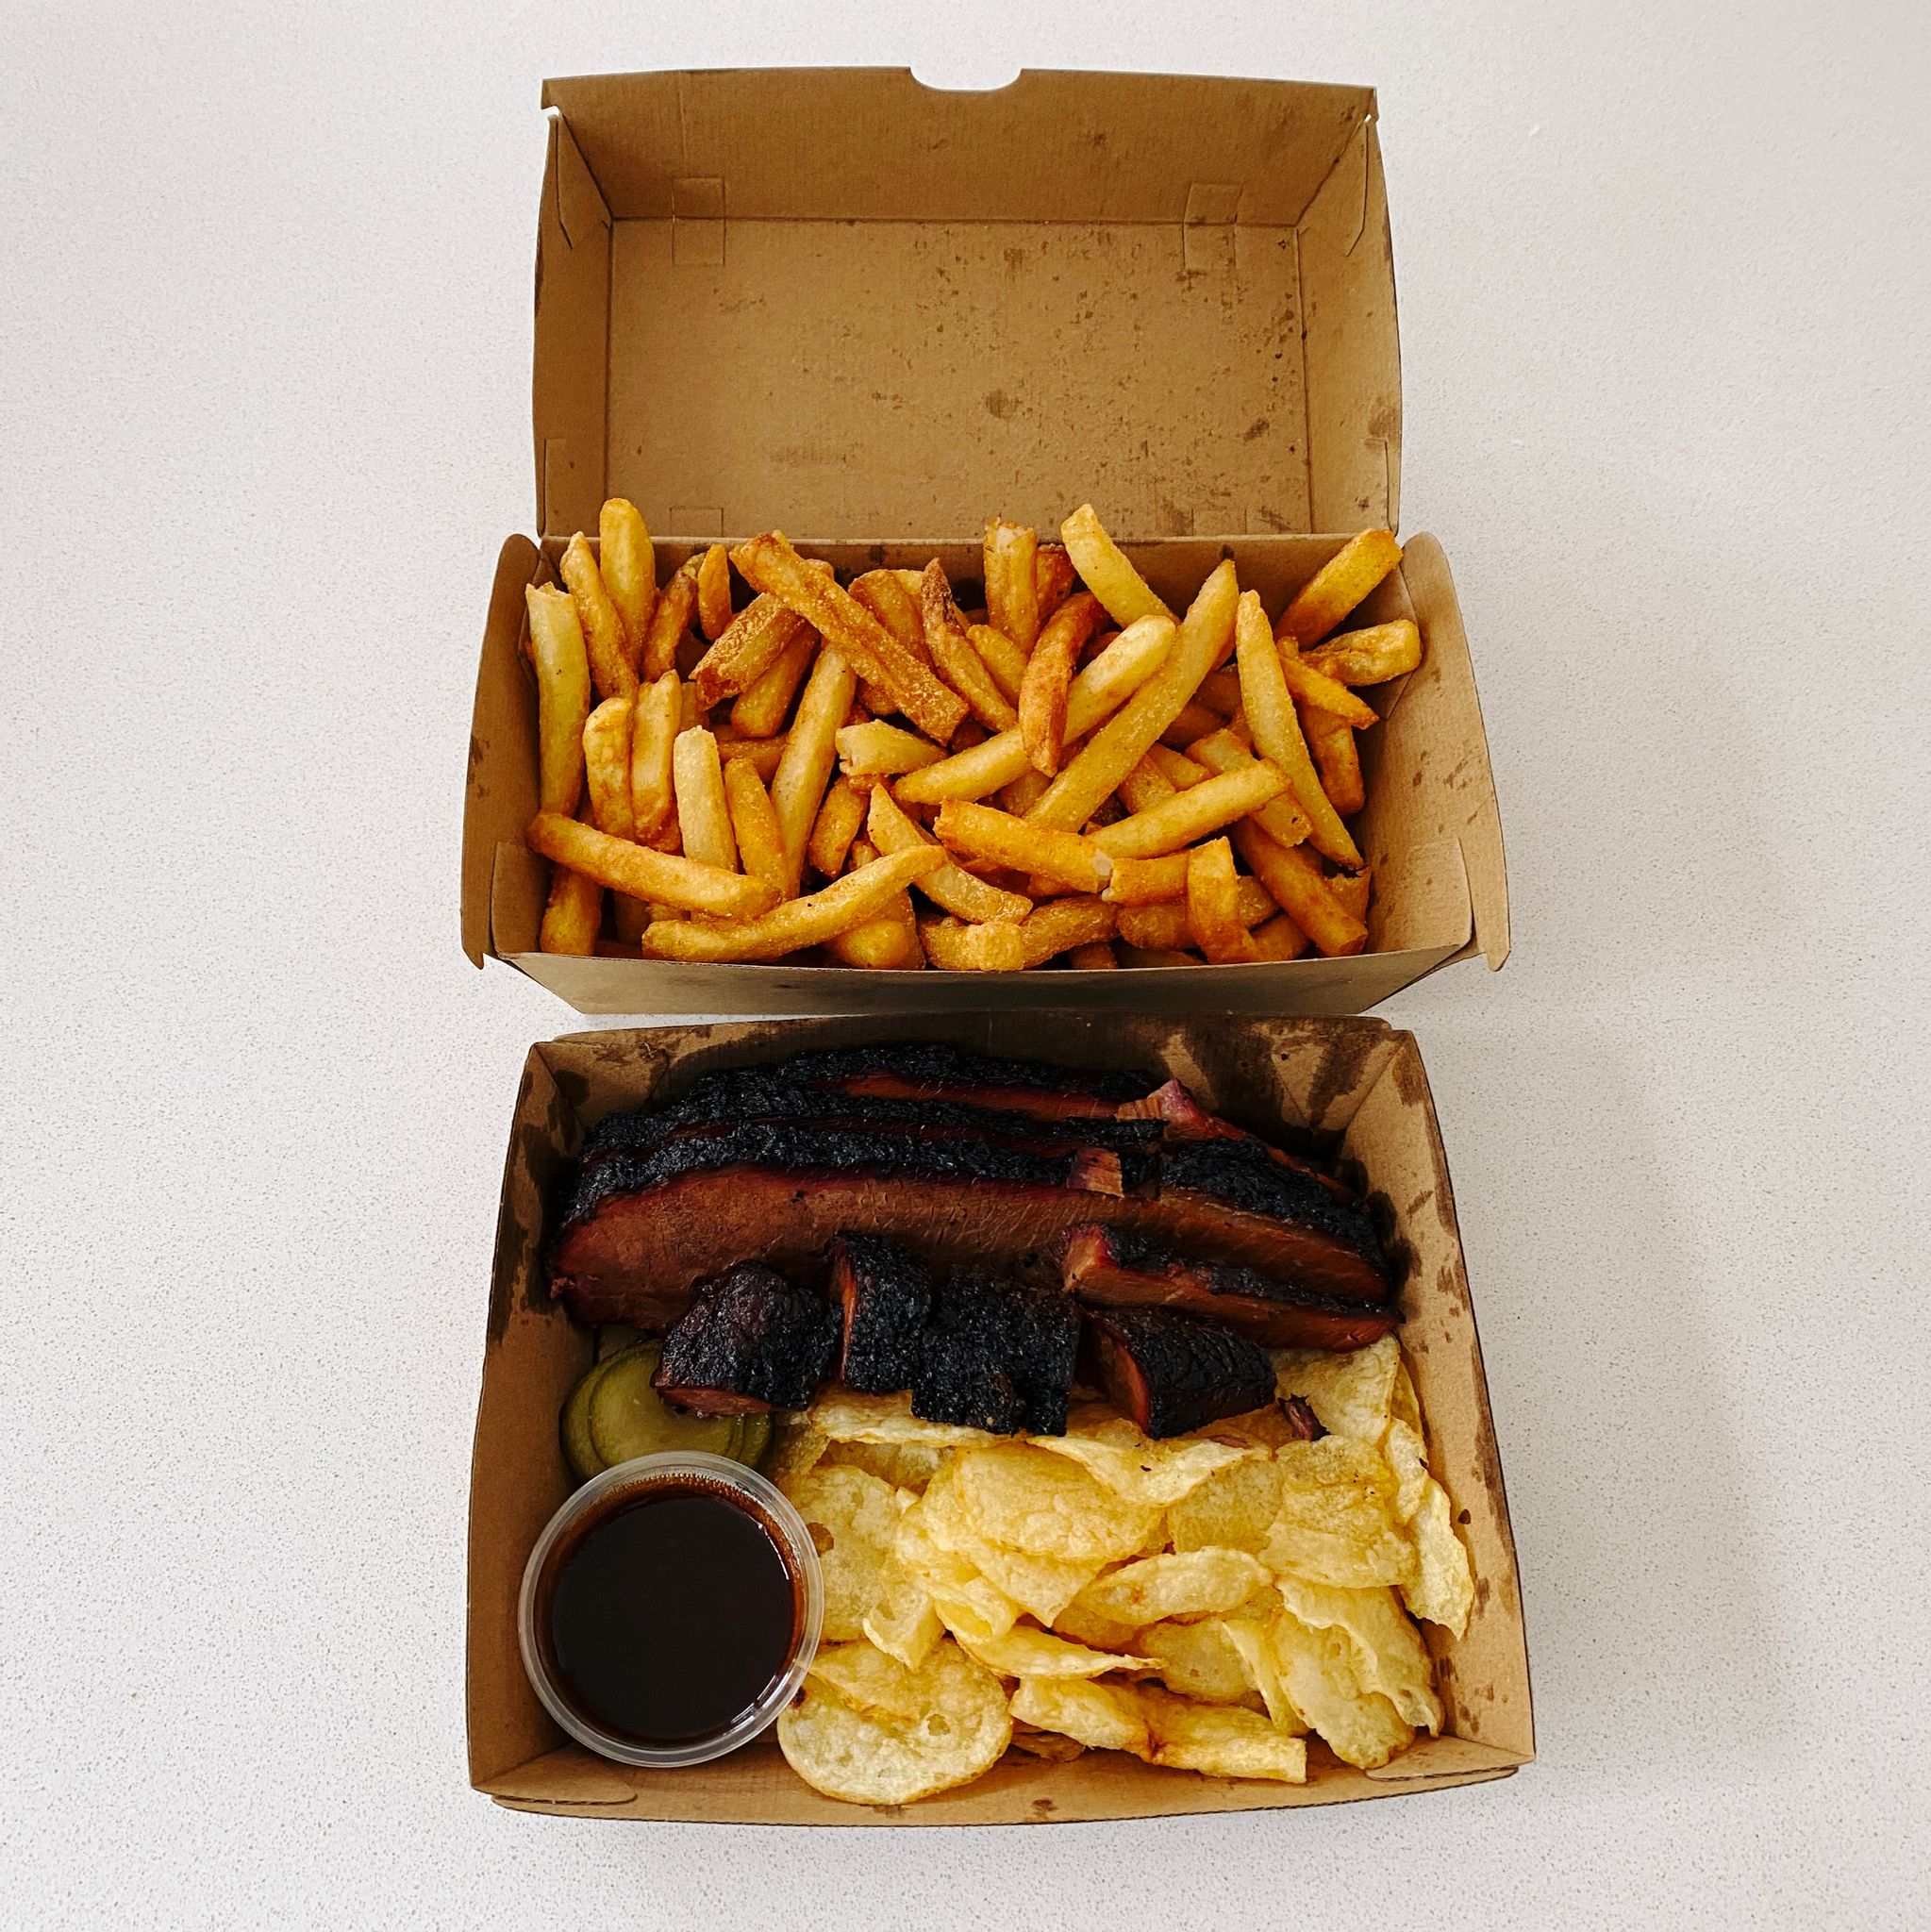 A photo of two cardboard takeaway boxes, one has hot chips, the other has slices of beef brisket, some potato chips, pickles, and a container of barbecue sauce in it.